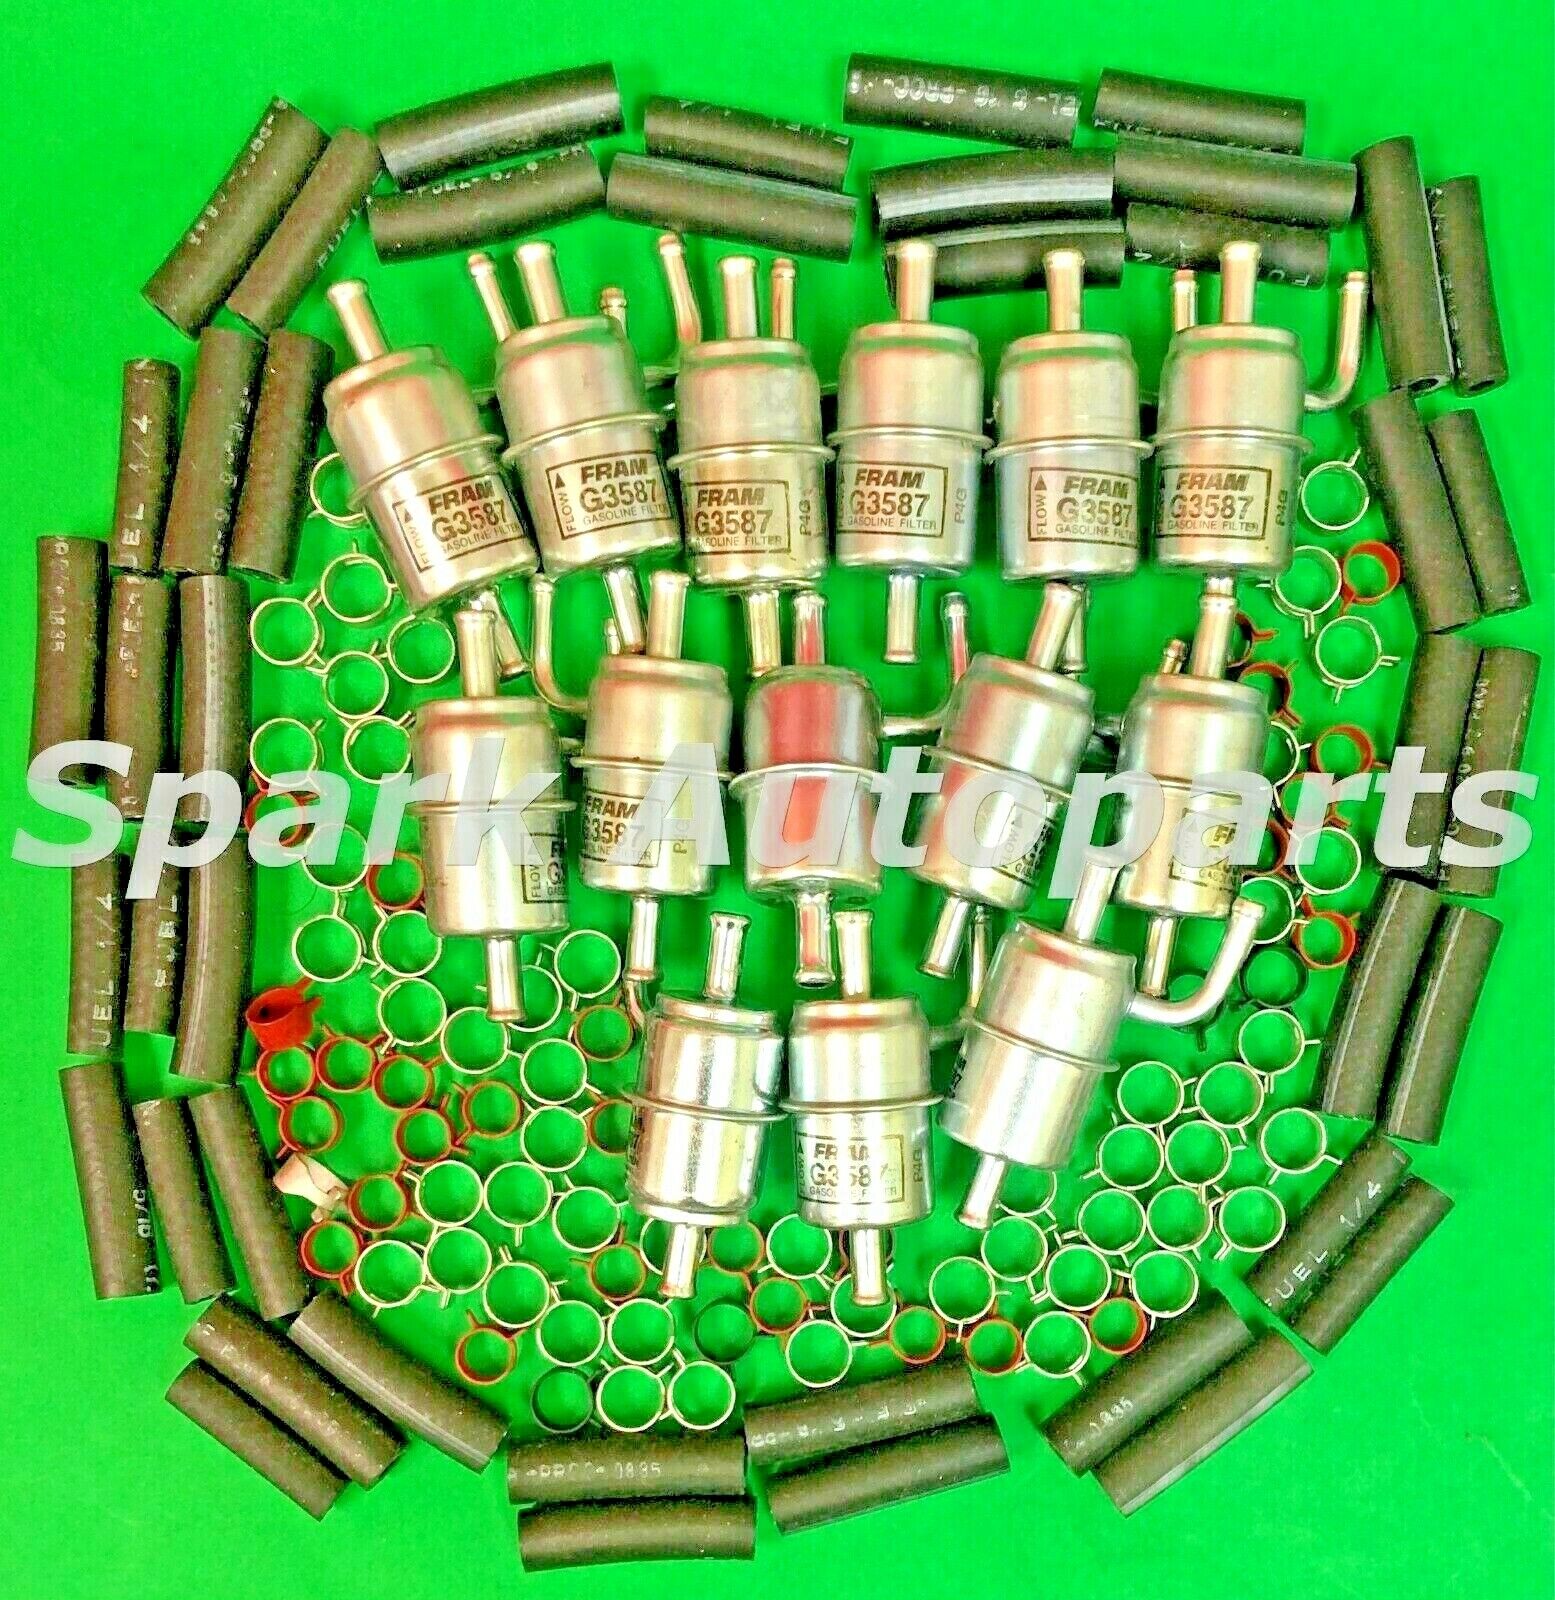 Lot of 14 Fuel Filter Fram G3587 For DODGE Caravan, Charger, PLYMOUTH Horizon